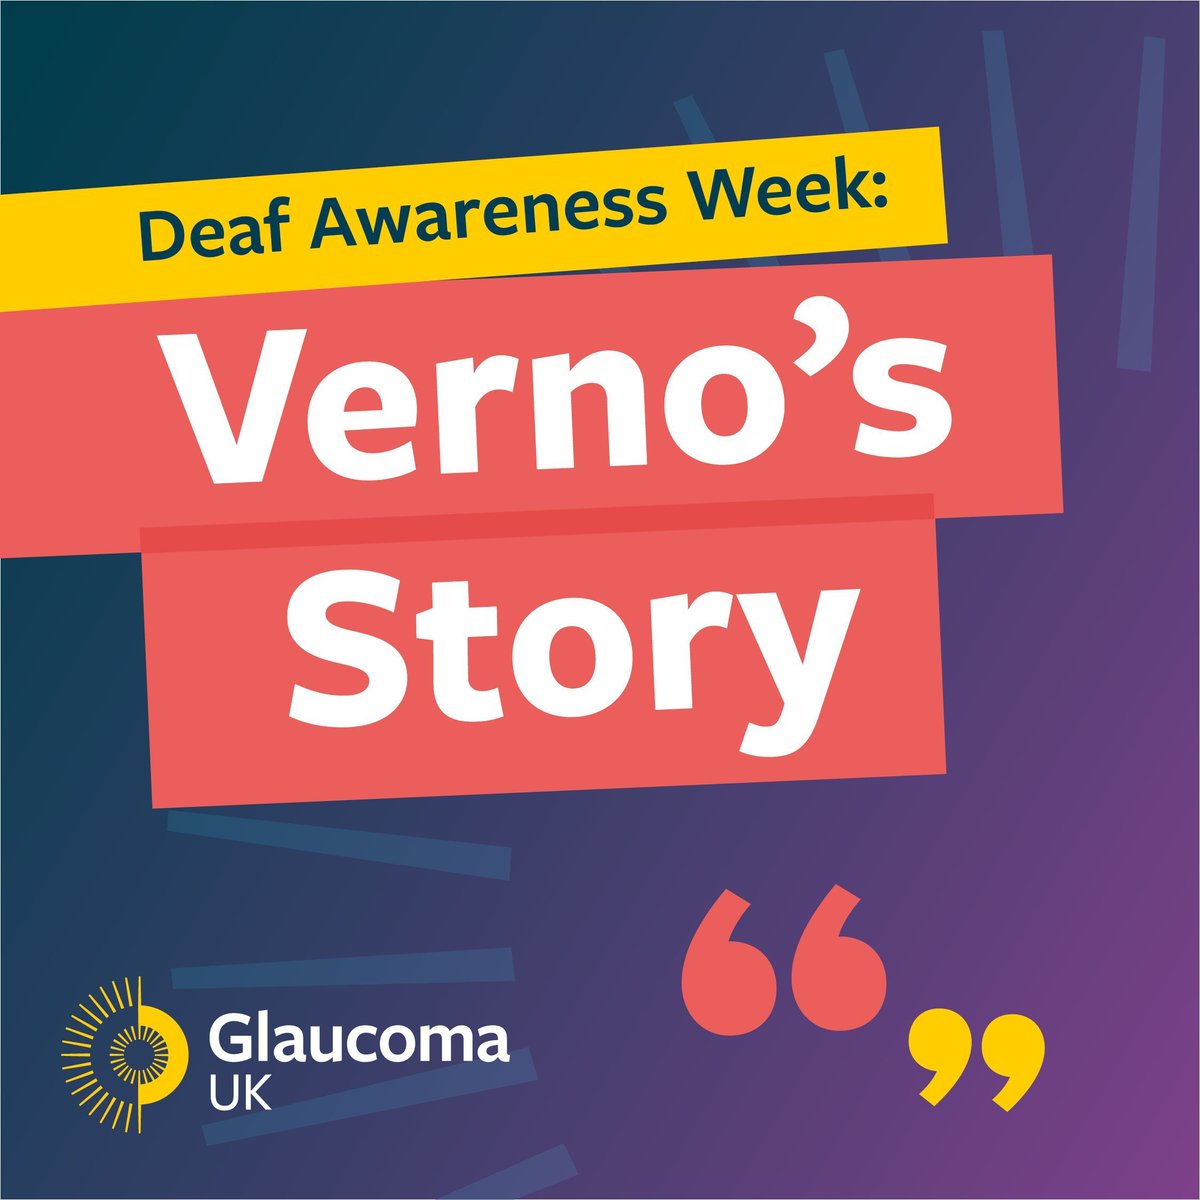 👂 Many people with glaucoma also have hearing problems, including Verno who lives with deafness, post-polio syndrome and advanced glaucoma. Read his story here: buff.ly/3JSmFuJ Do you live with hearing problems alongside glaucoma? #DeafAwarenessWeek #MyDeafStory